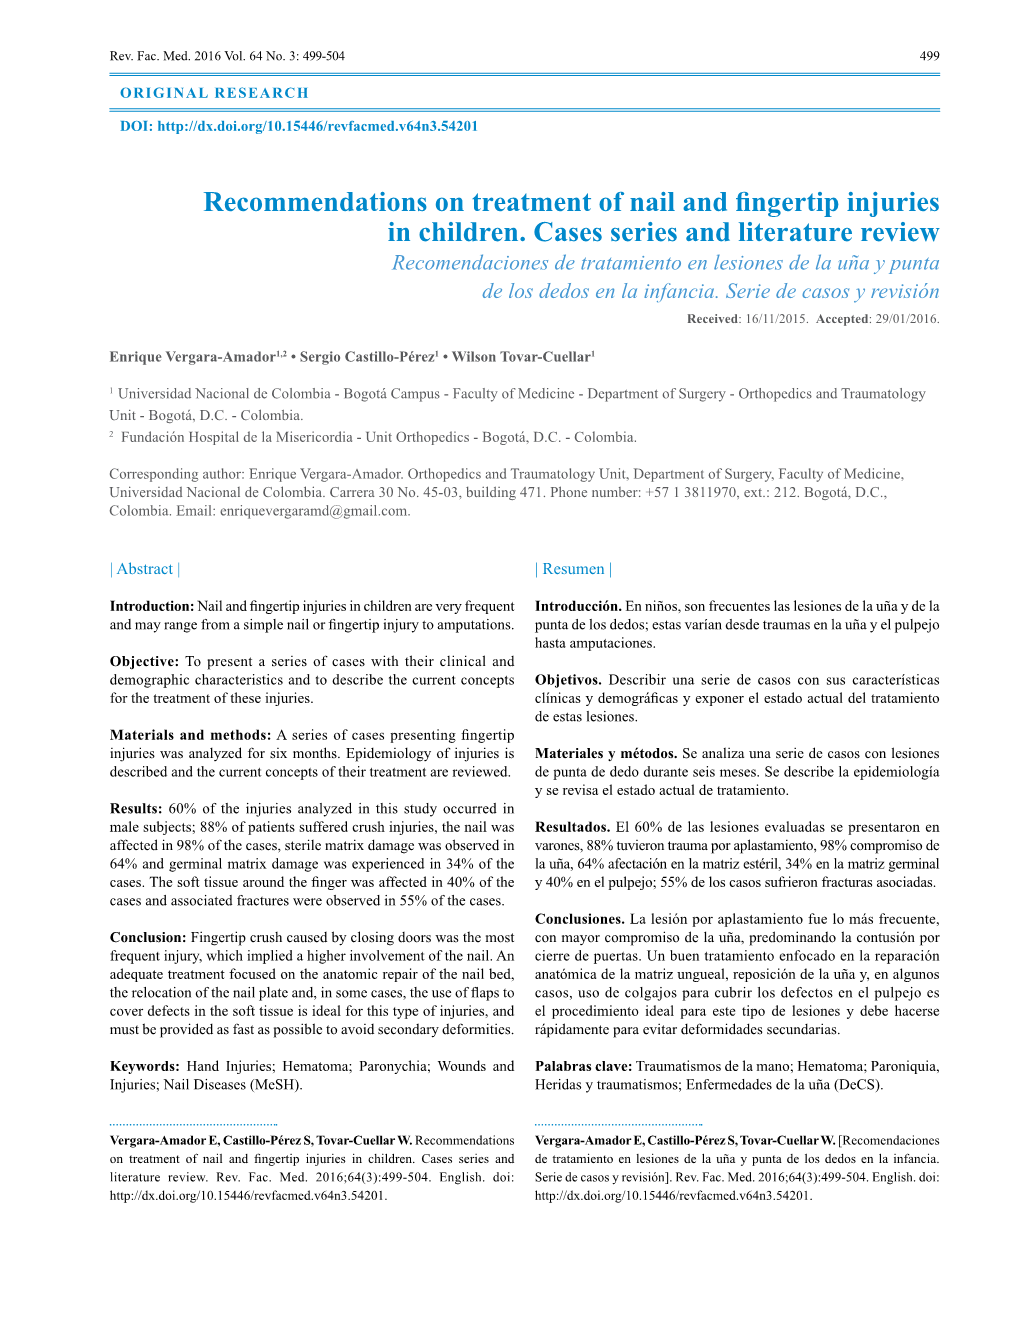 Recommendations on Treatment of Nail and Fingertip Injuries in Children